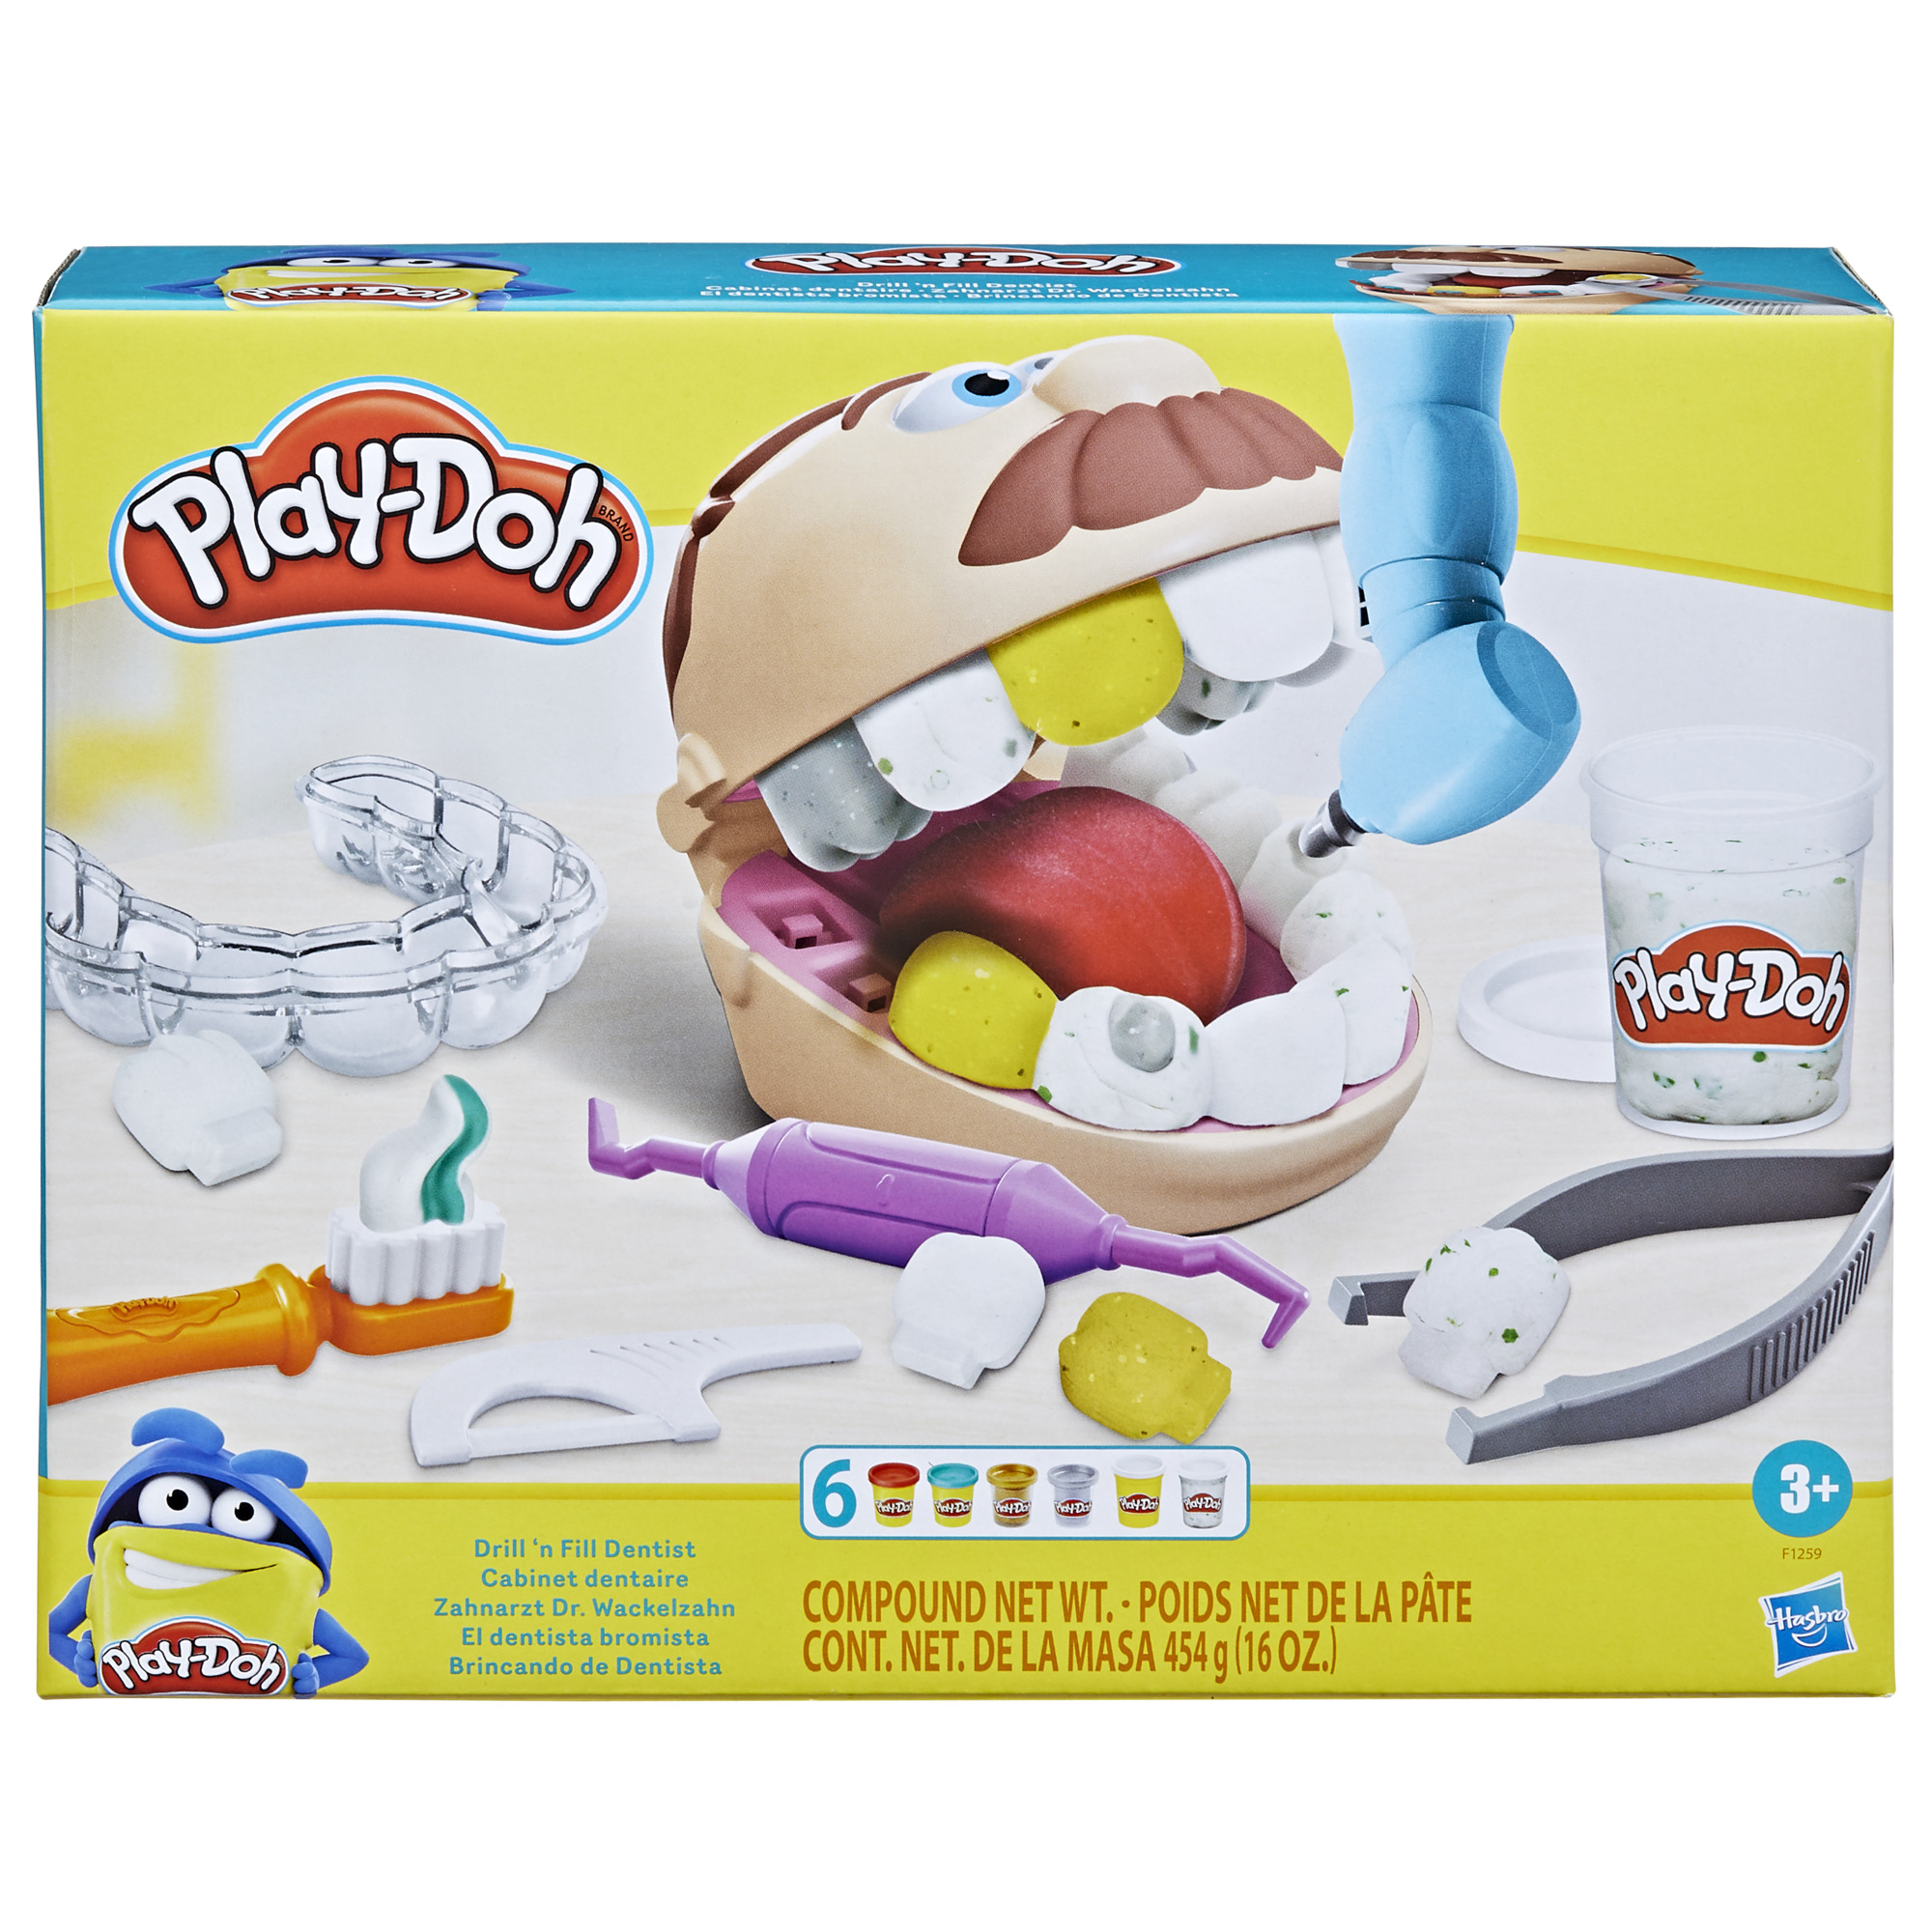 Play-Doh Drill 'n Fill Dentist Toy for Kids 3 Years and Up with 8 Modeling Compound Cans, Non-Toxic, Assorted Colors - image 1 of 12